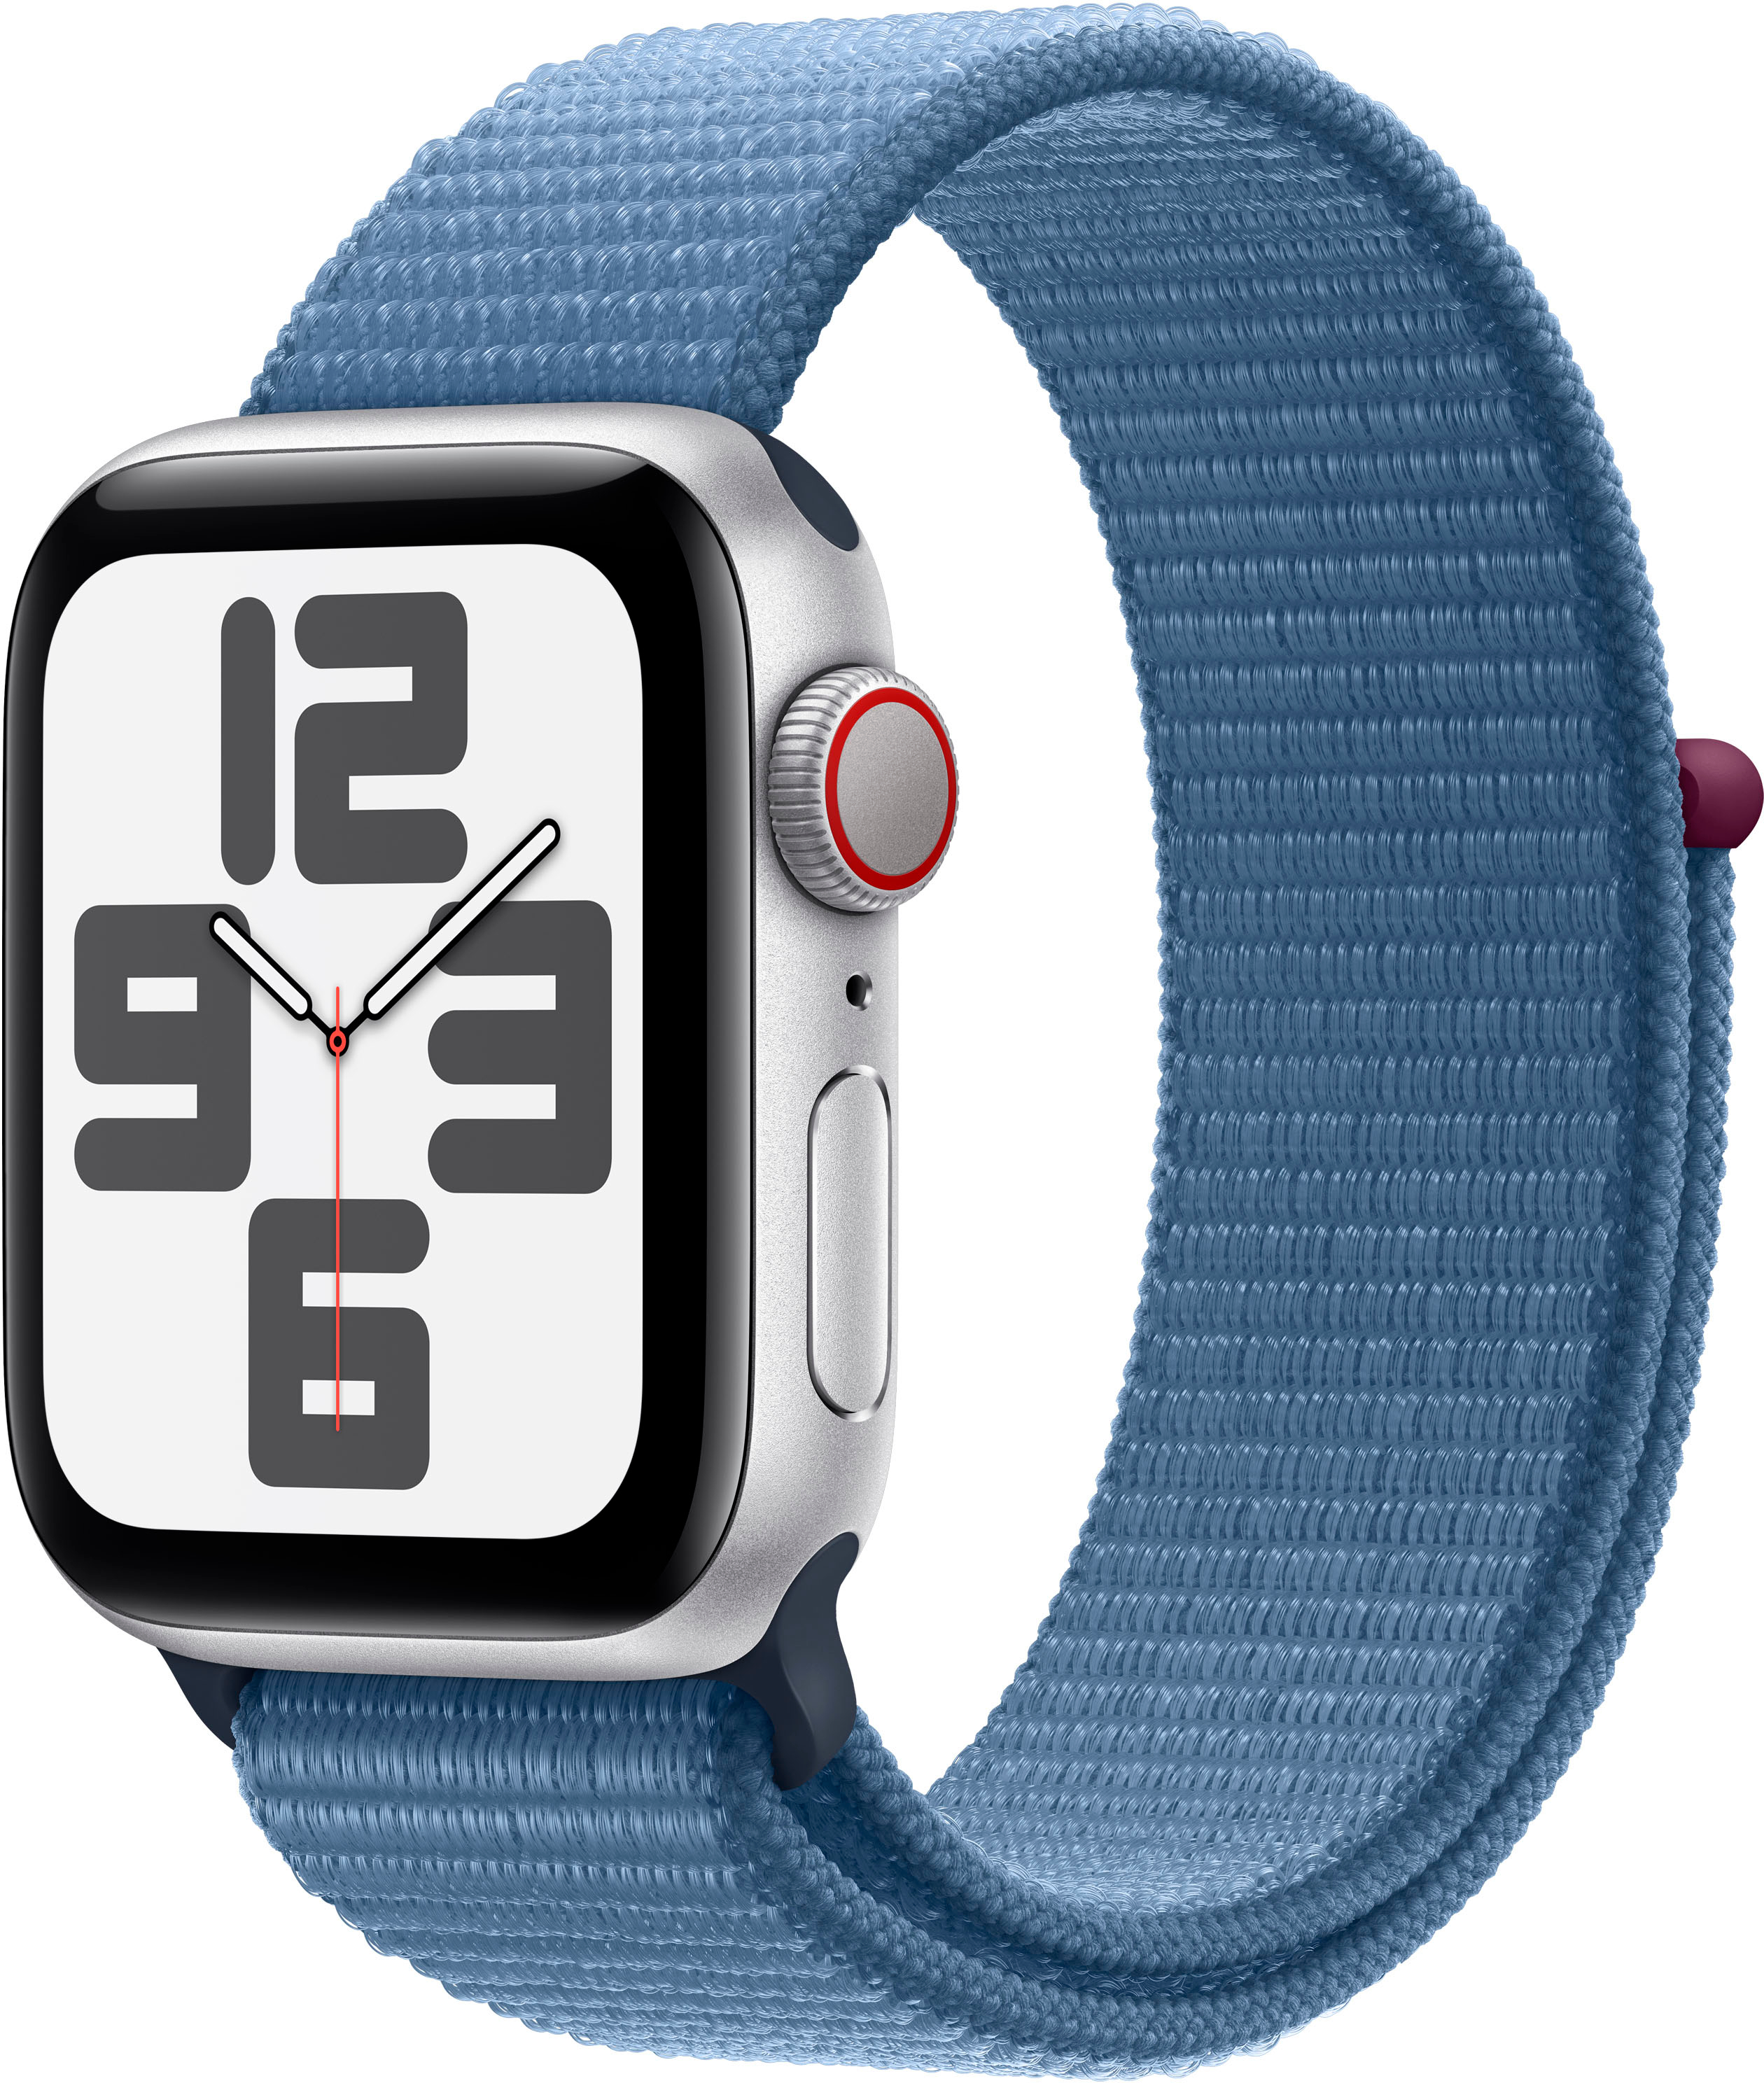 Apple Watch SE 2nd 40mm MRGP3LL/A + Cellular) Winter Buy Loop (GPS (Verizon) Blue Best Sport with Silver Case Aluminum - Generation Silver